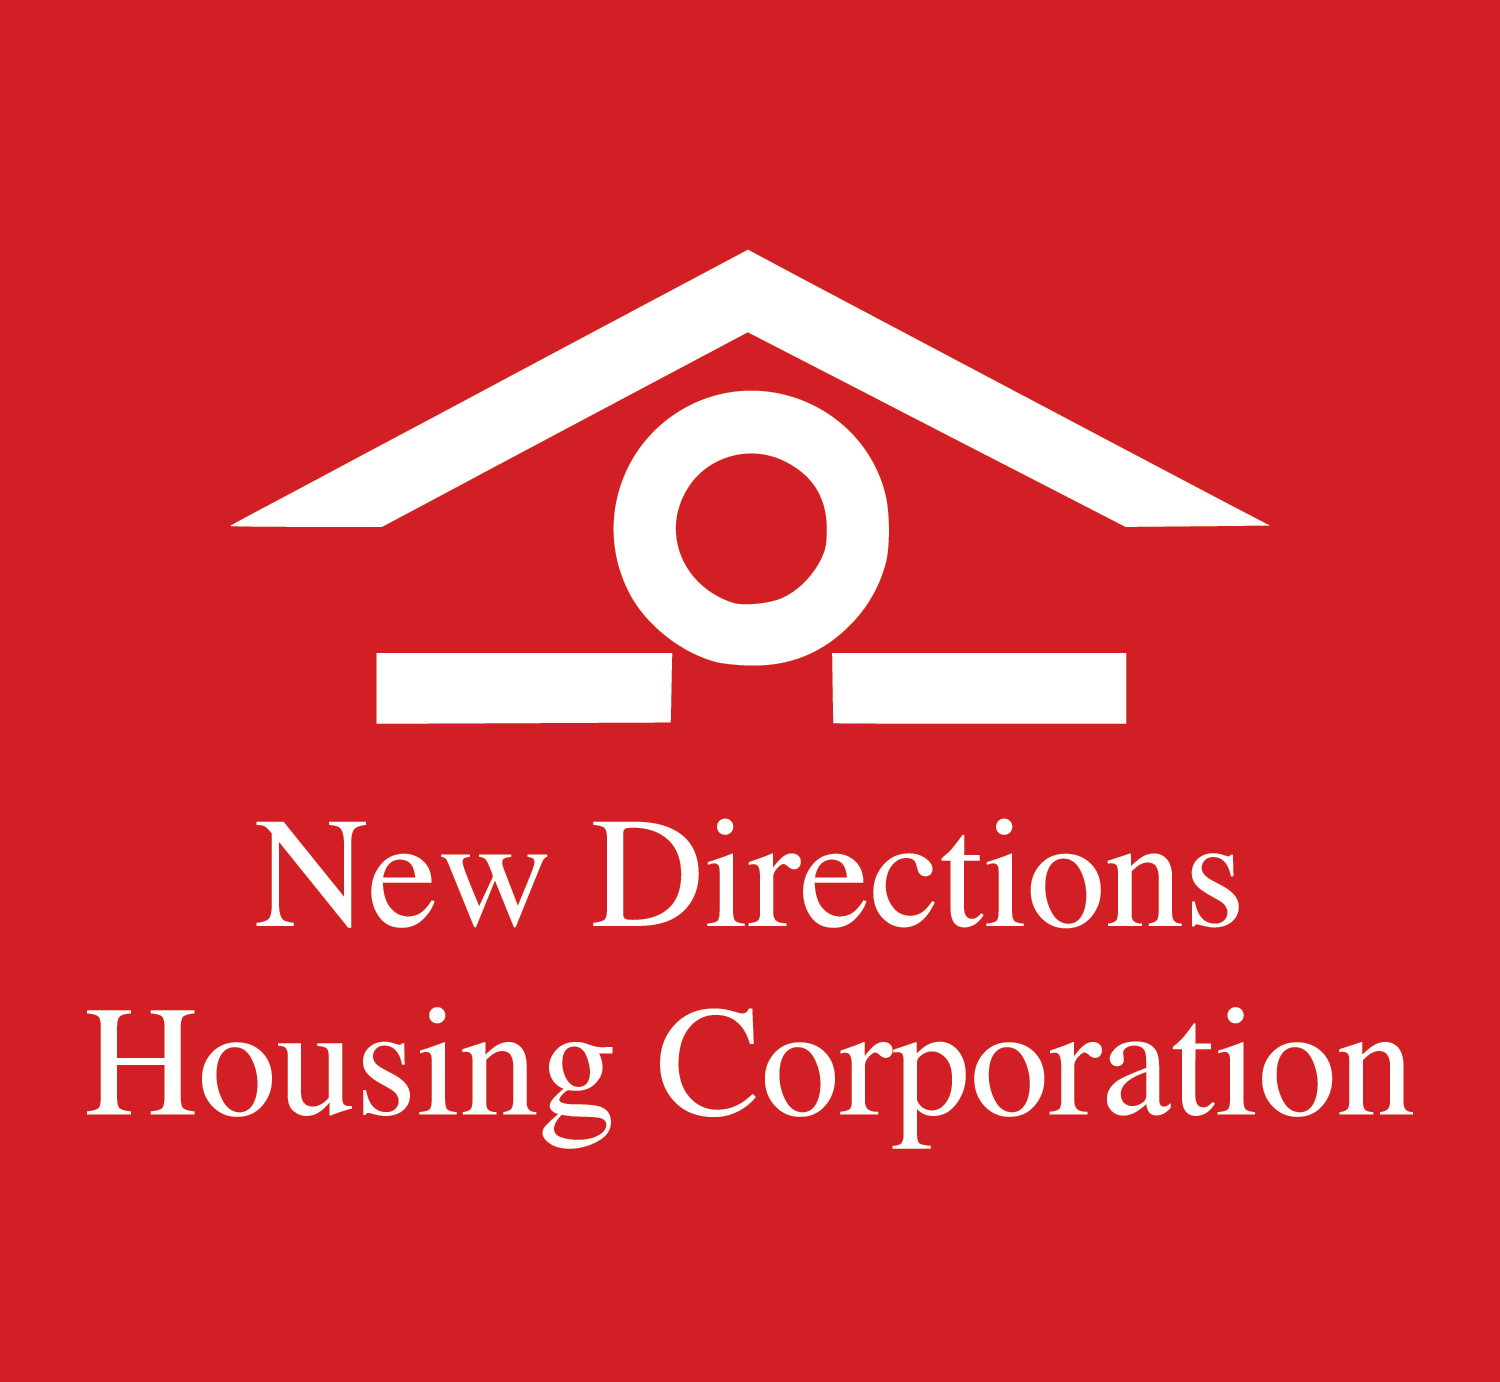 Directions Logo - New Directions Housing Corporation